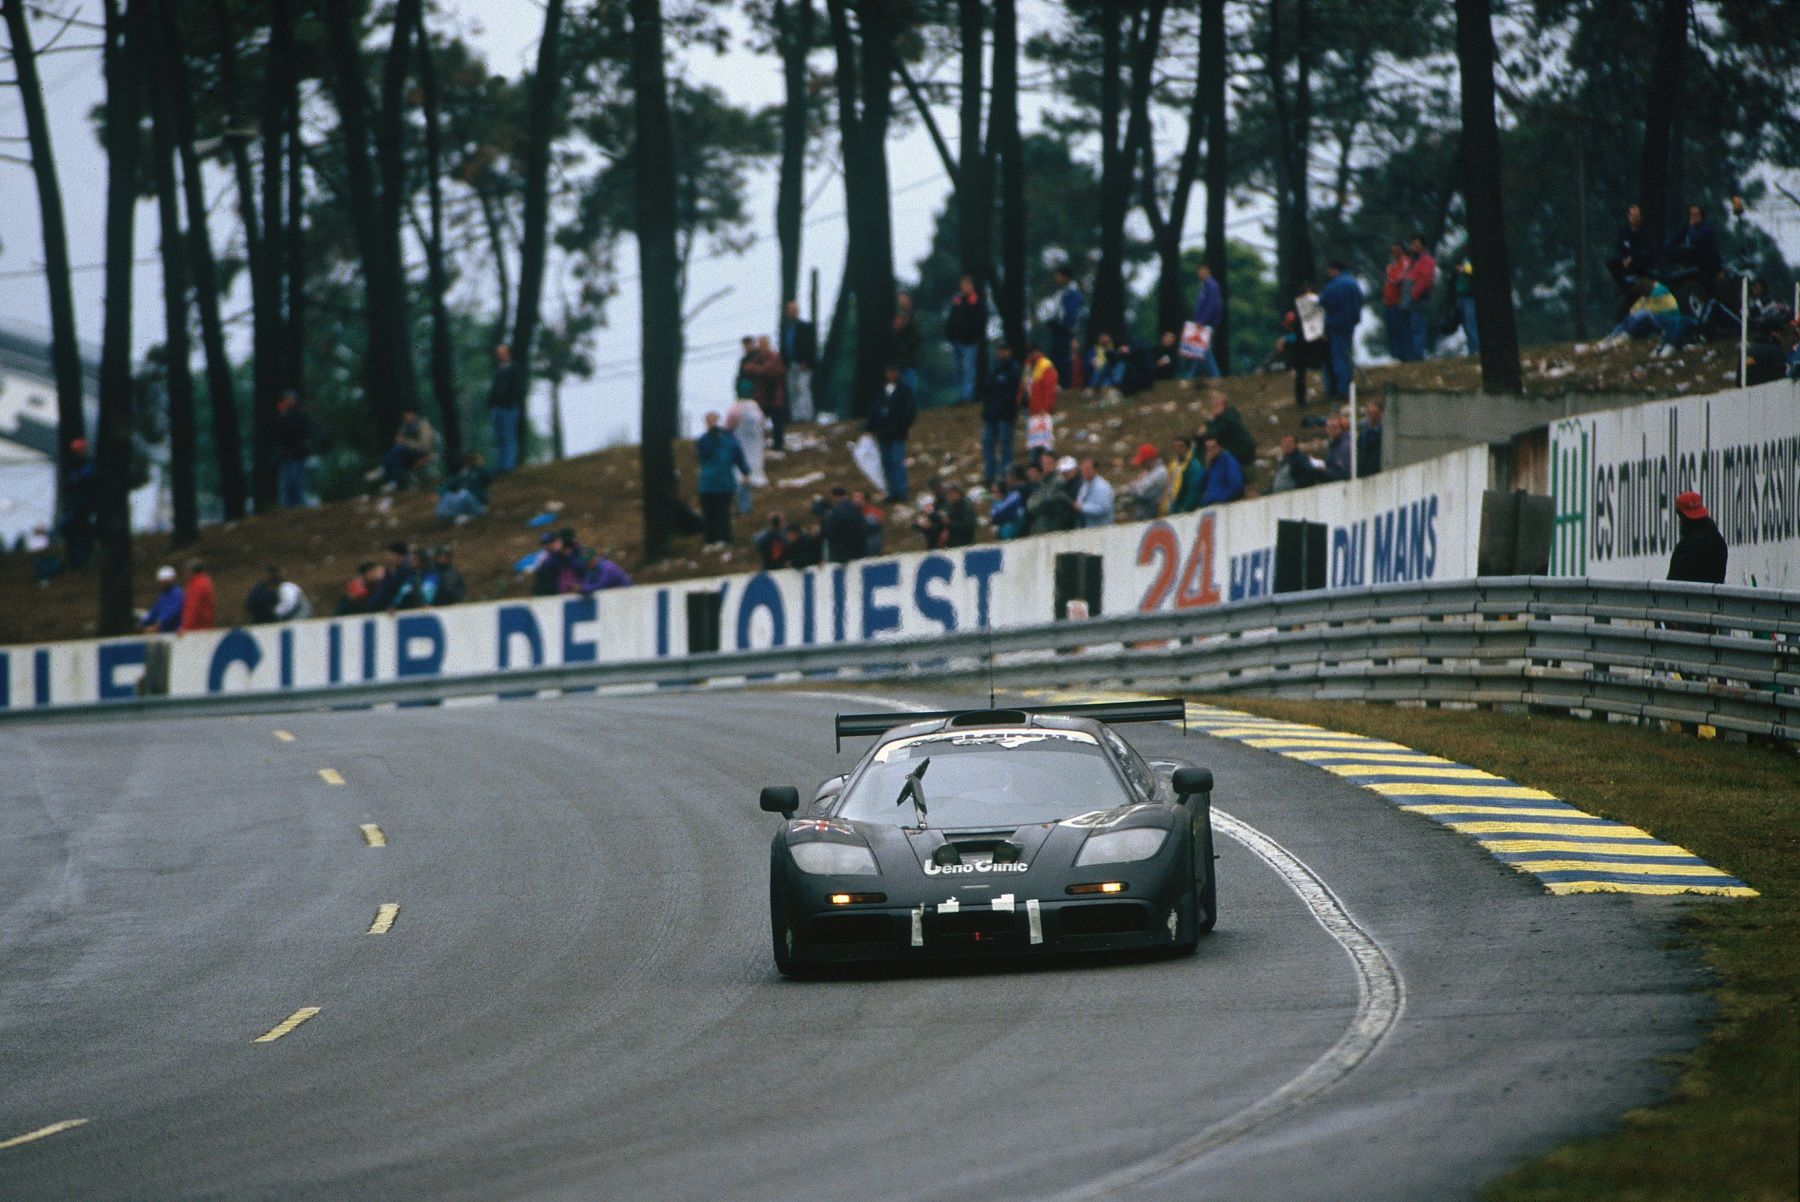 Our legendary Le Mans triumph told by those who lived it